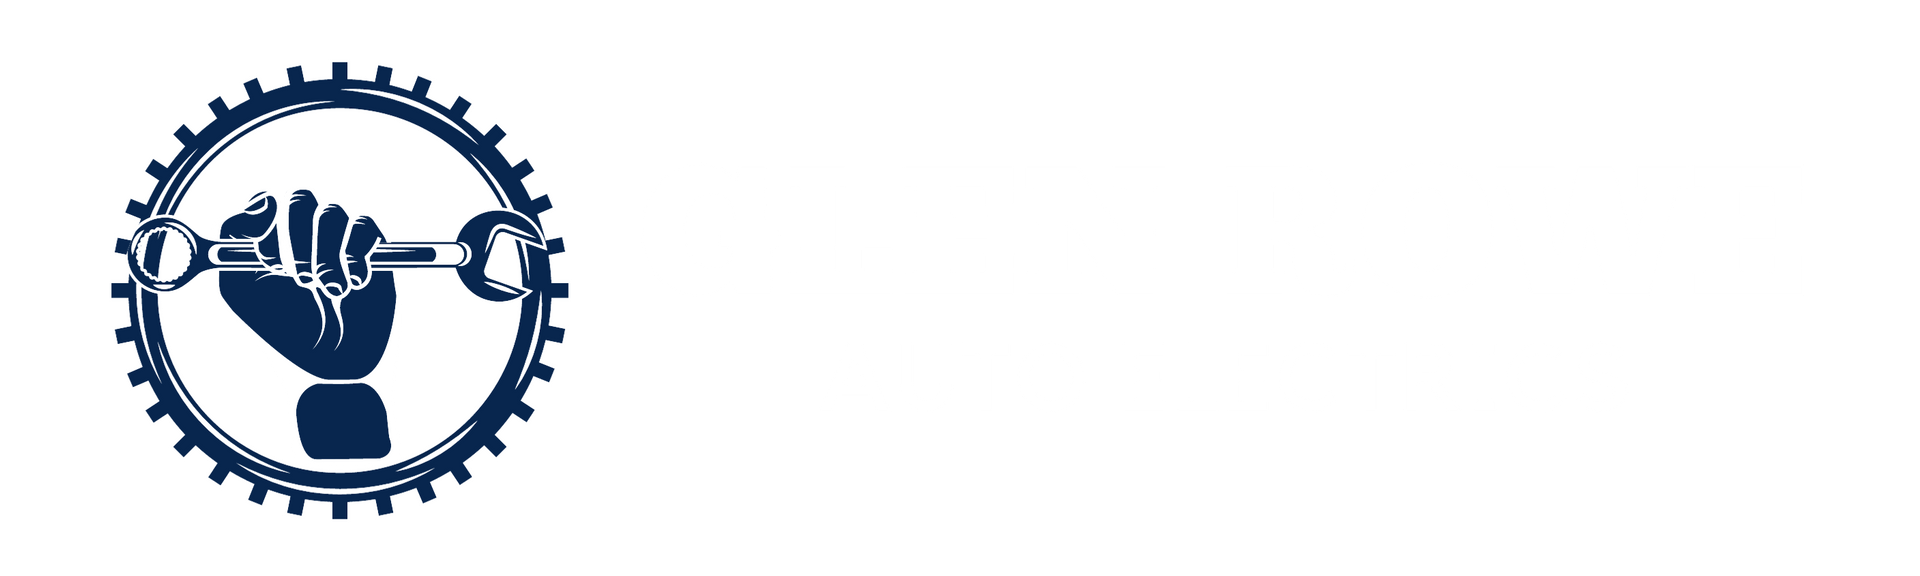 Glenn Rowe Auto Electrics—Servicing Tweed Heads and the Northern Rivers